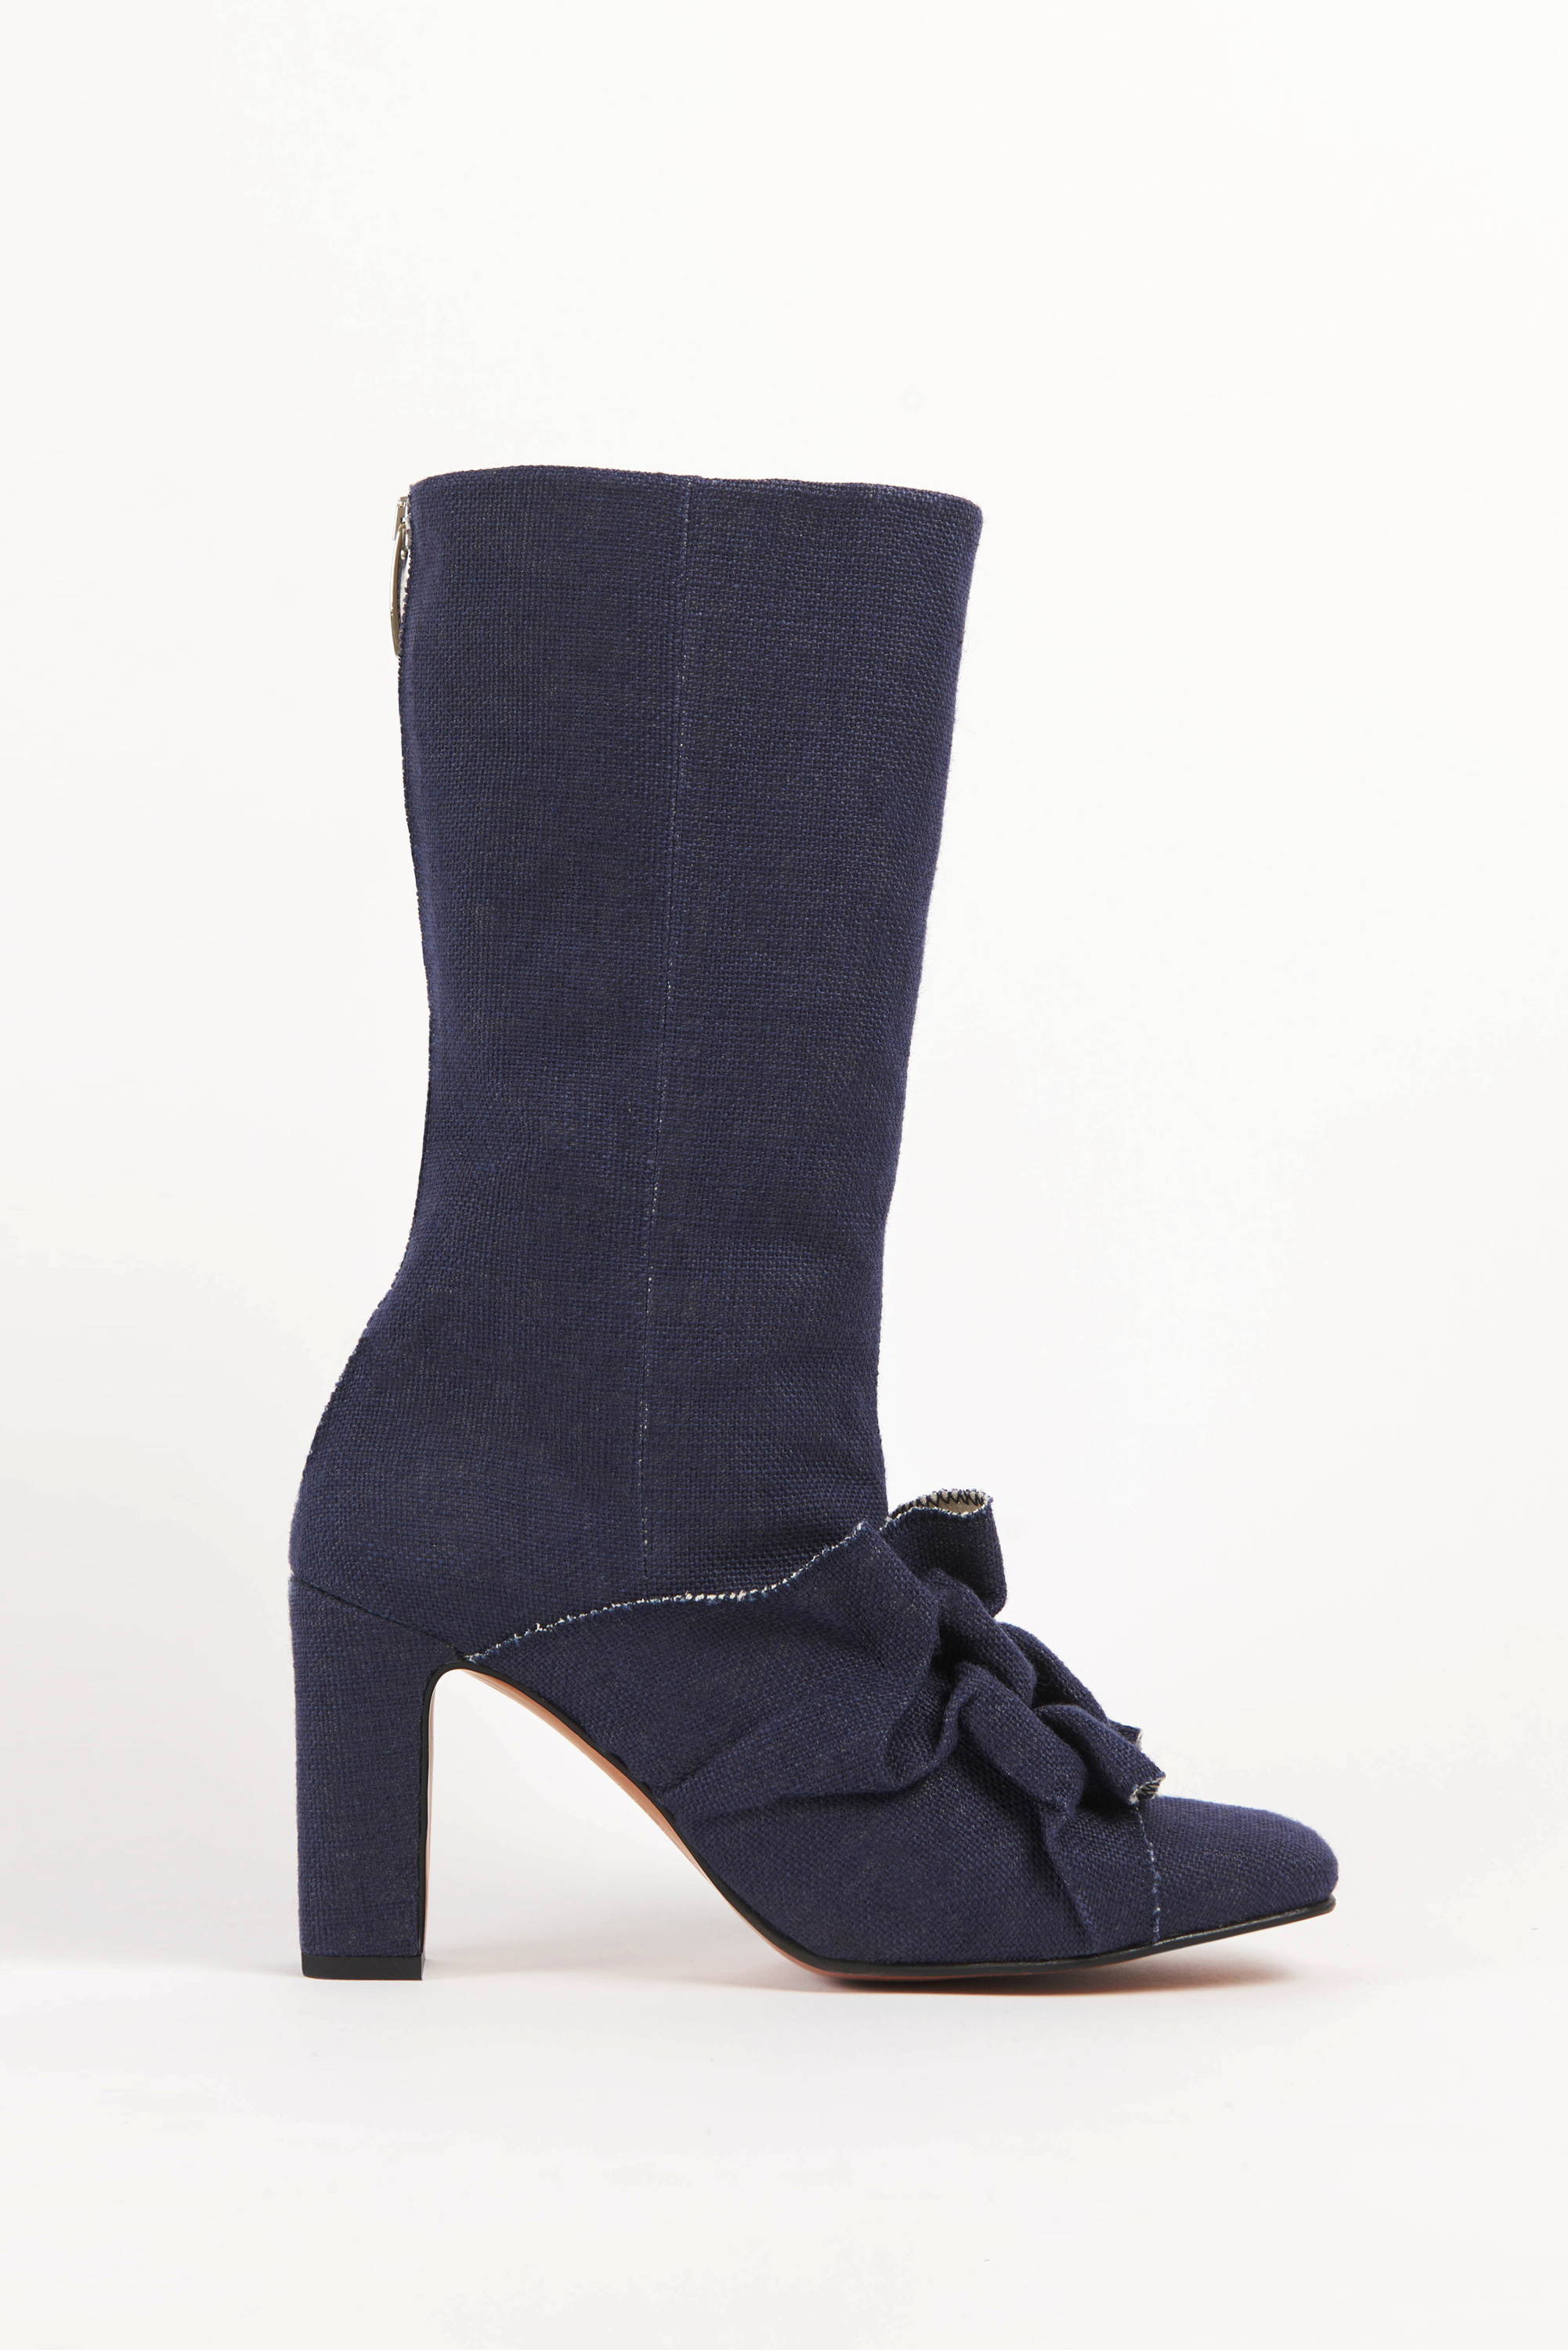 Vandrelaar Greta navy linen high-heel ankle boot made from sustainable vegan materials featuring canadian smocking detail and a silver zip